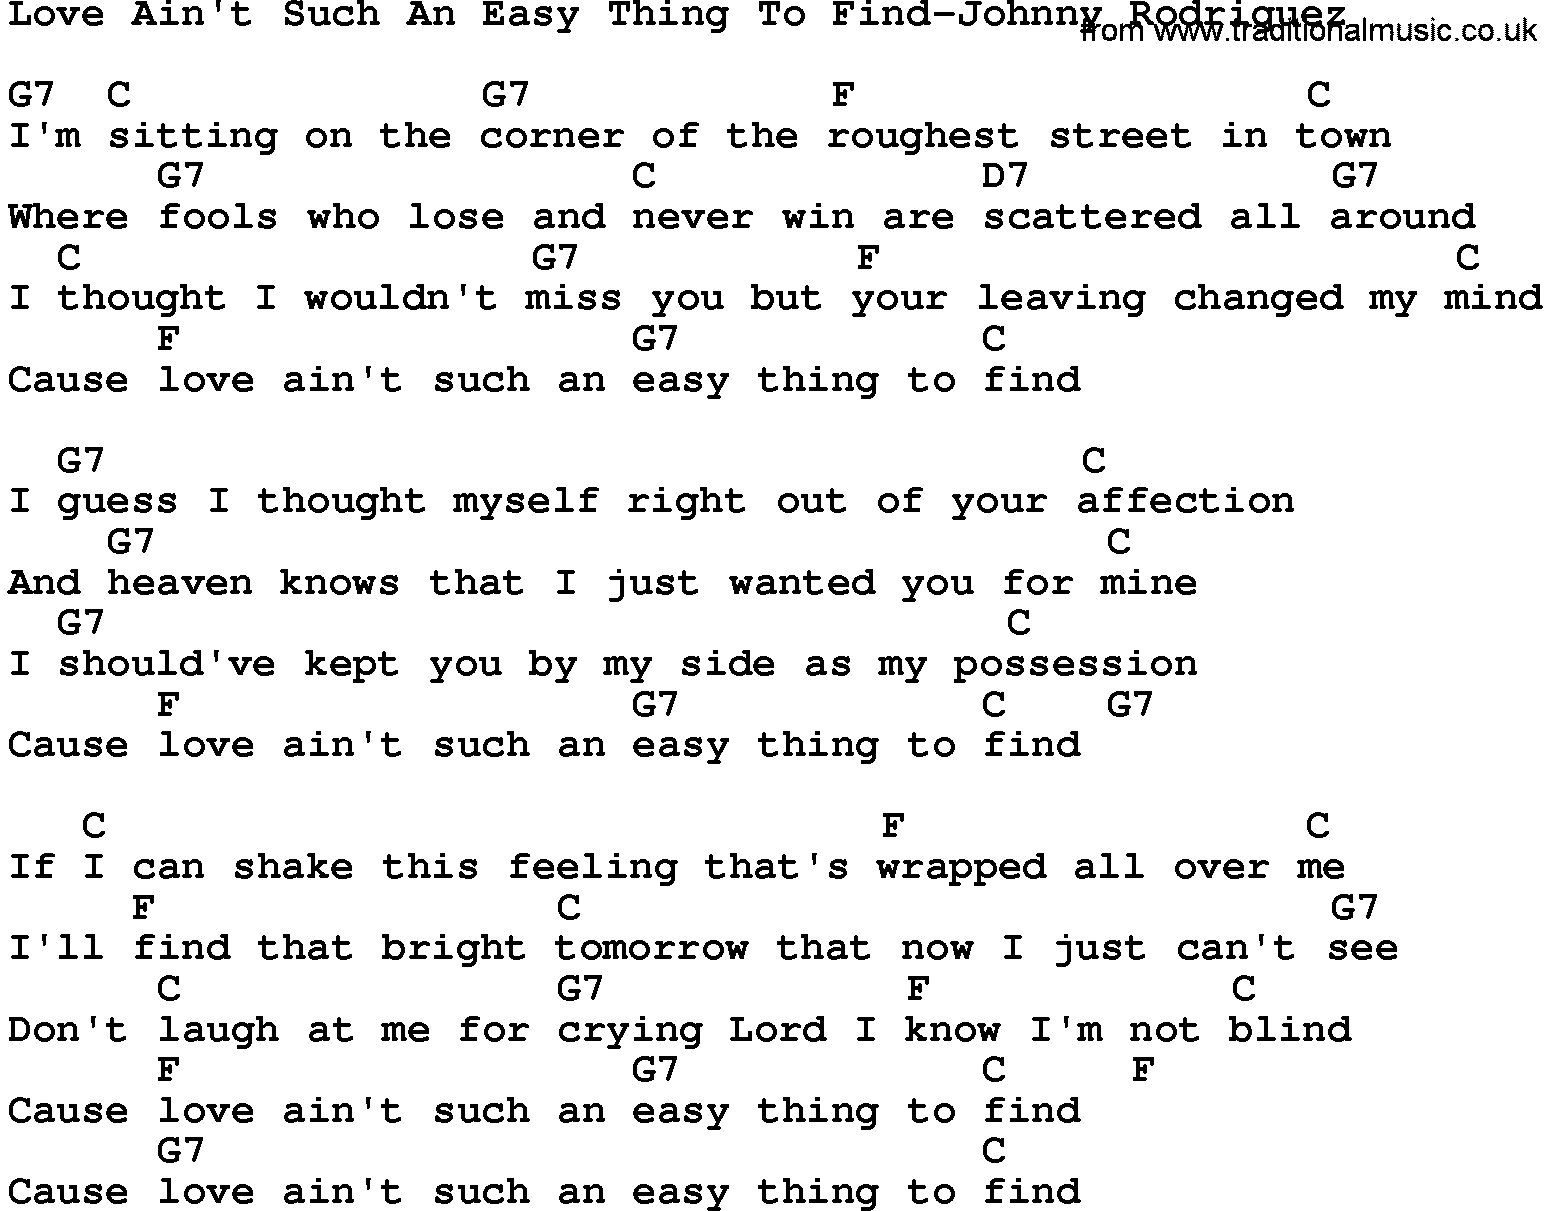 Country music song: Love Ain't Such An Easy Thing To Find-Johnny Rodriguez lyrics and chords